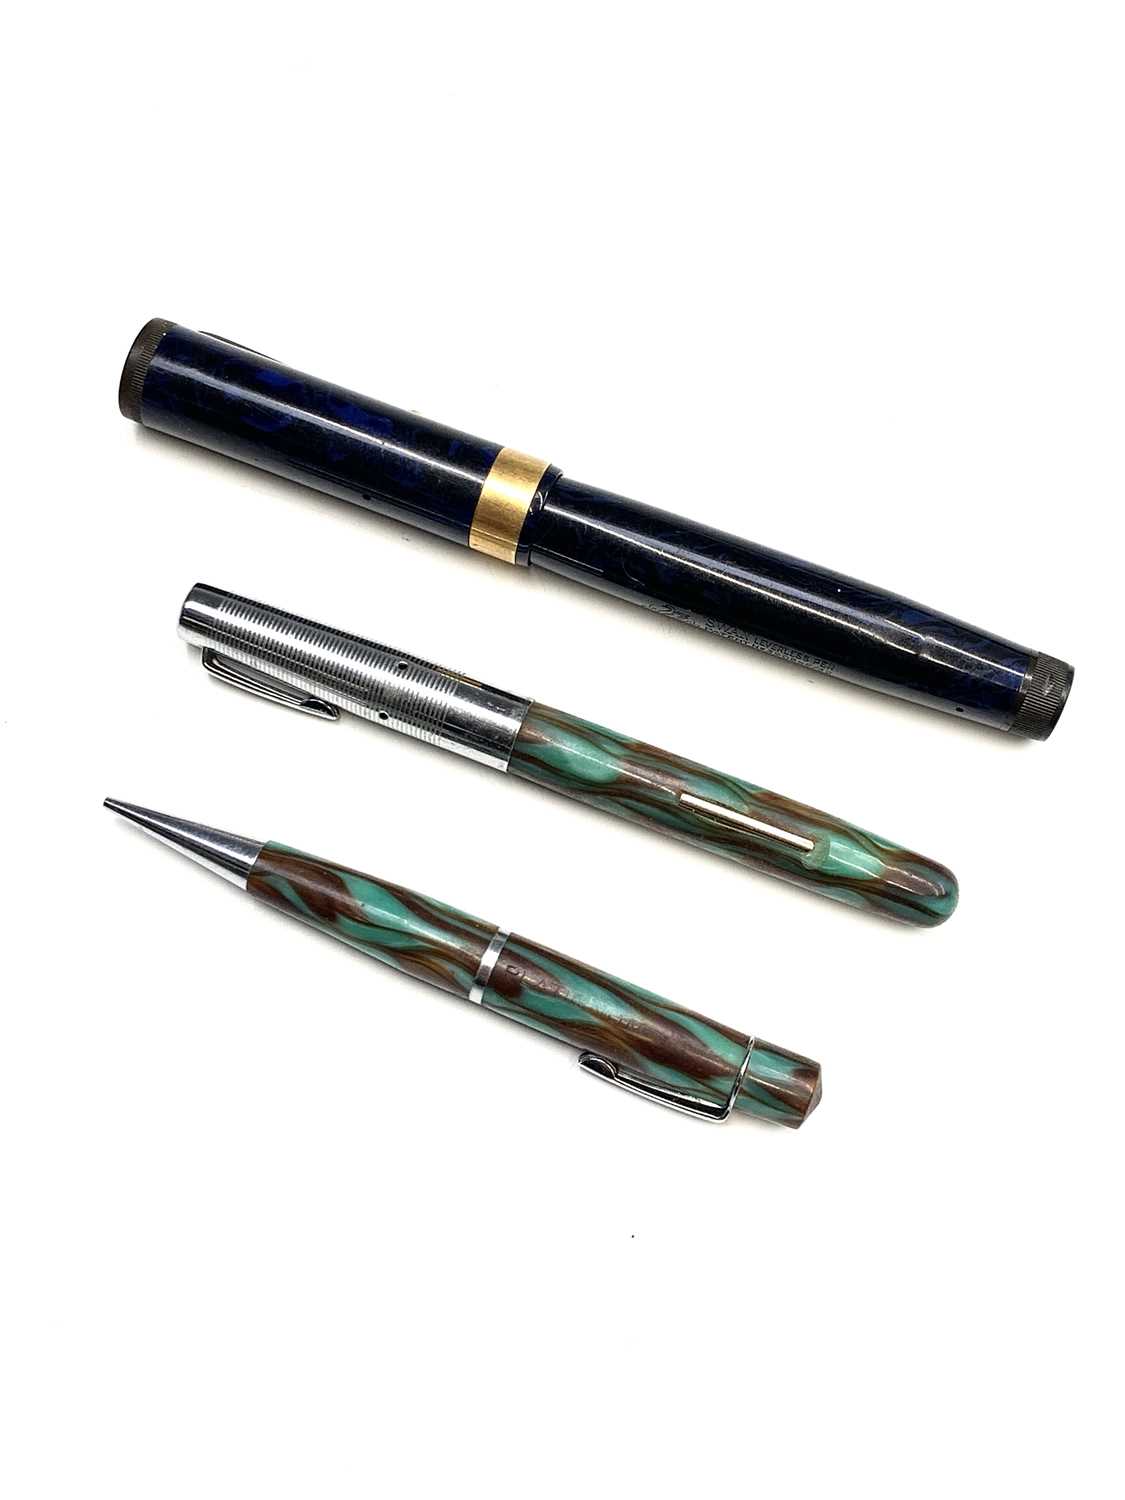 A Swan Mabie Todd L 470/52 Blue/Black,Marble Leverless fountain pen with size 4 14ct gold nib. The - Image 2 of 11